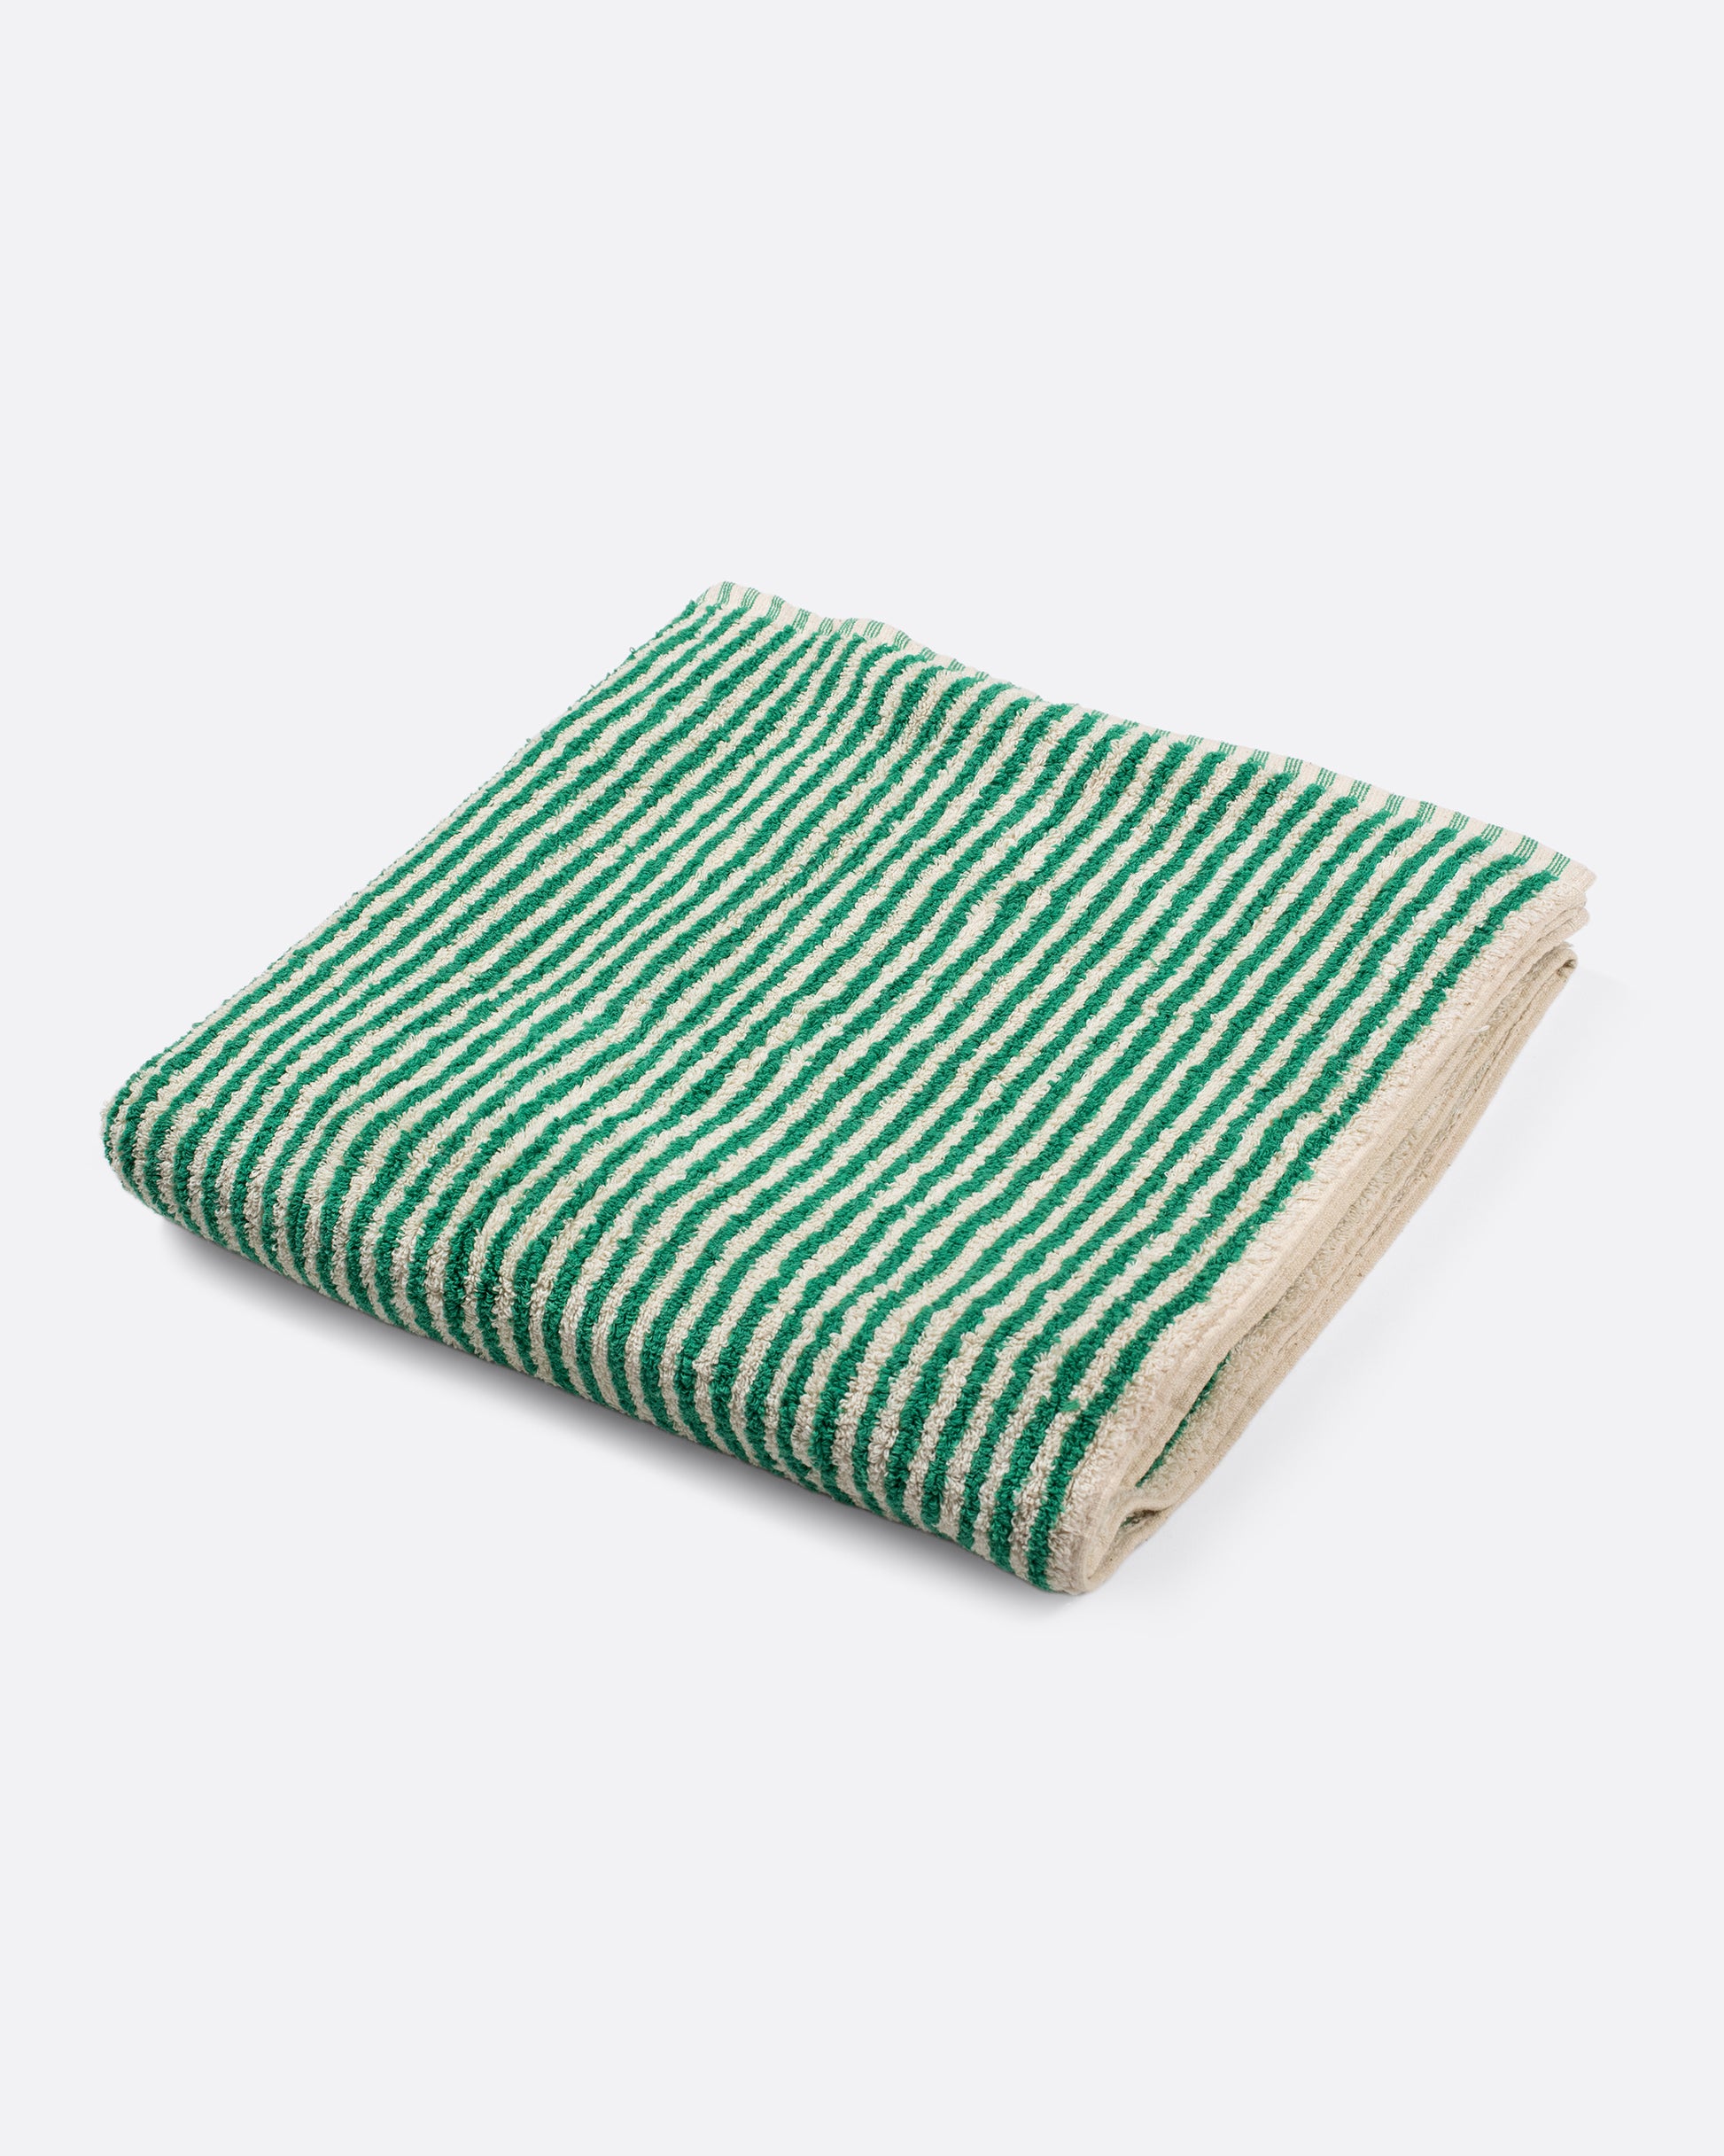 This Turkish bath towel is lightweight but incredibly absorbent. It rolls up easily, making it your new go-to beach and pool companion.